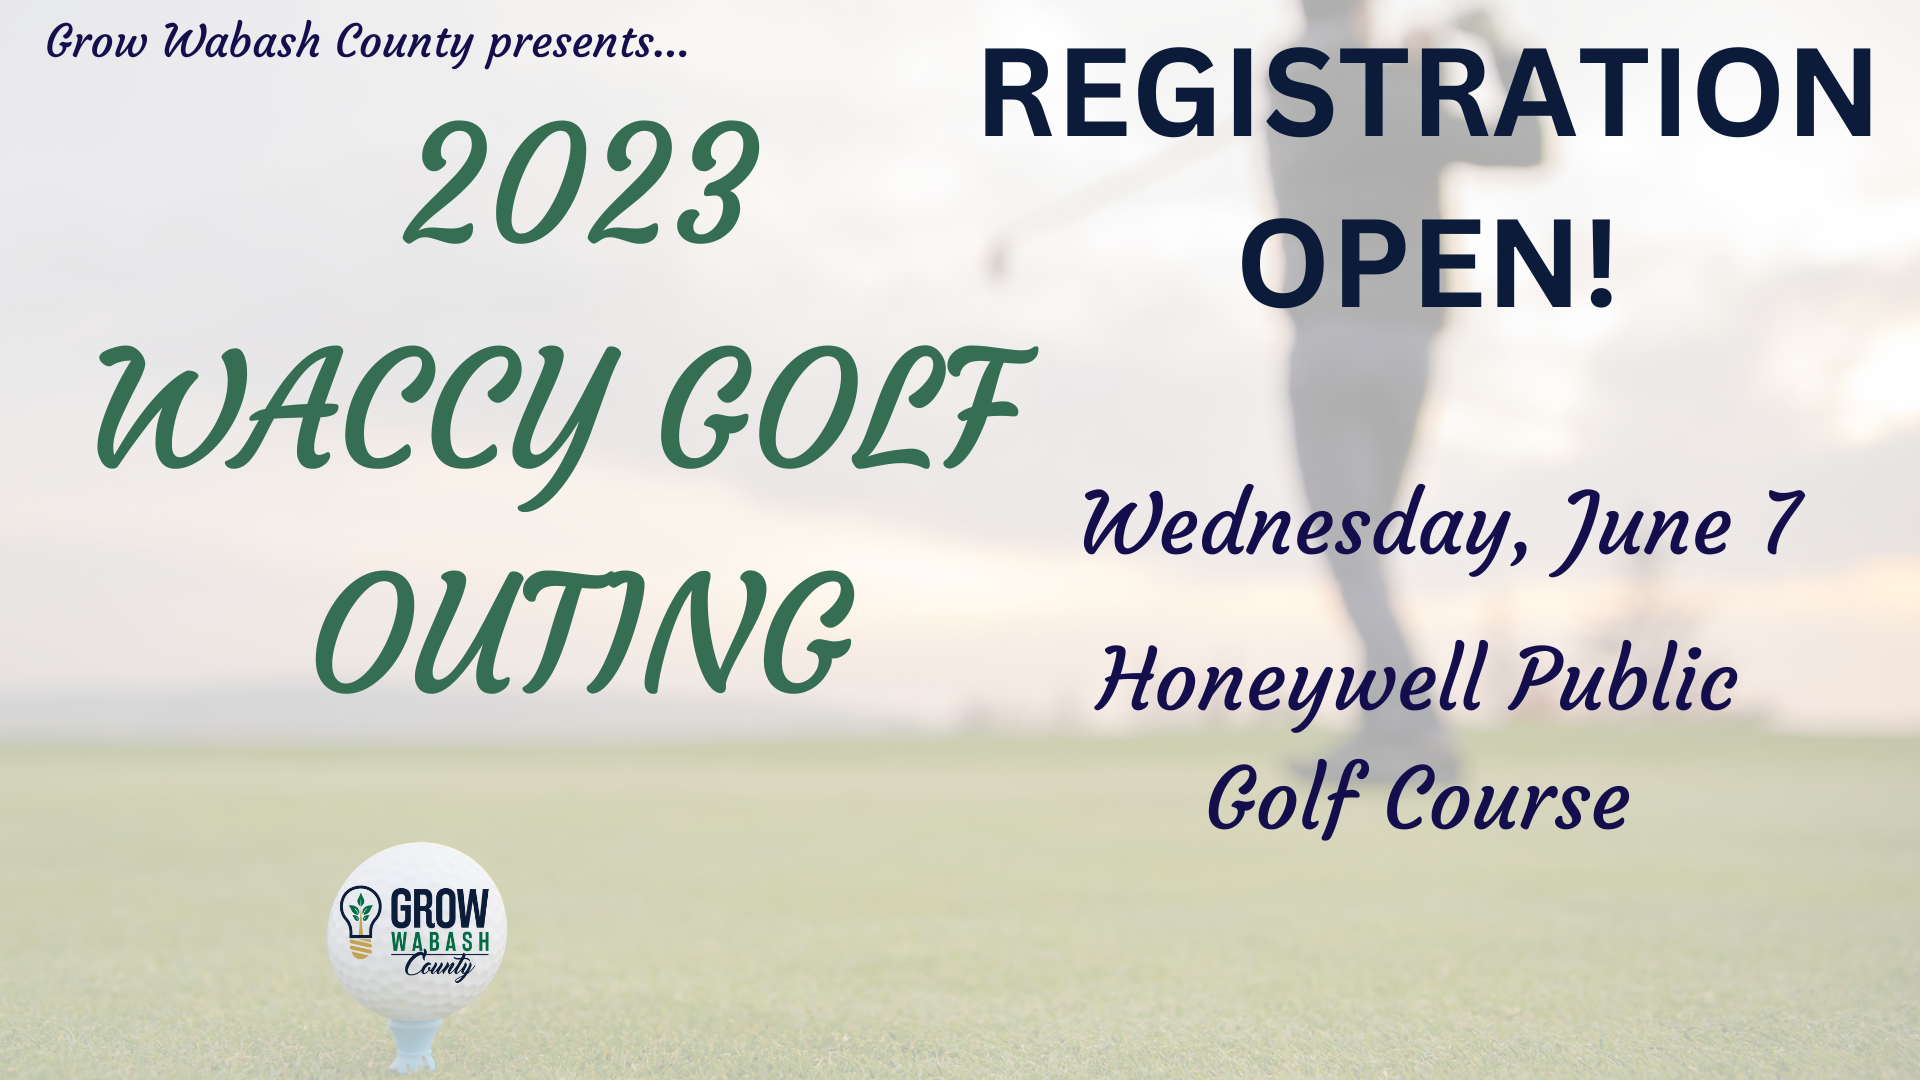 WACCY Golf Outing returns June 7 Photo